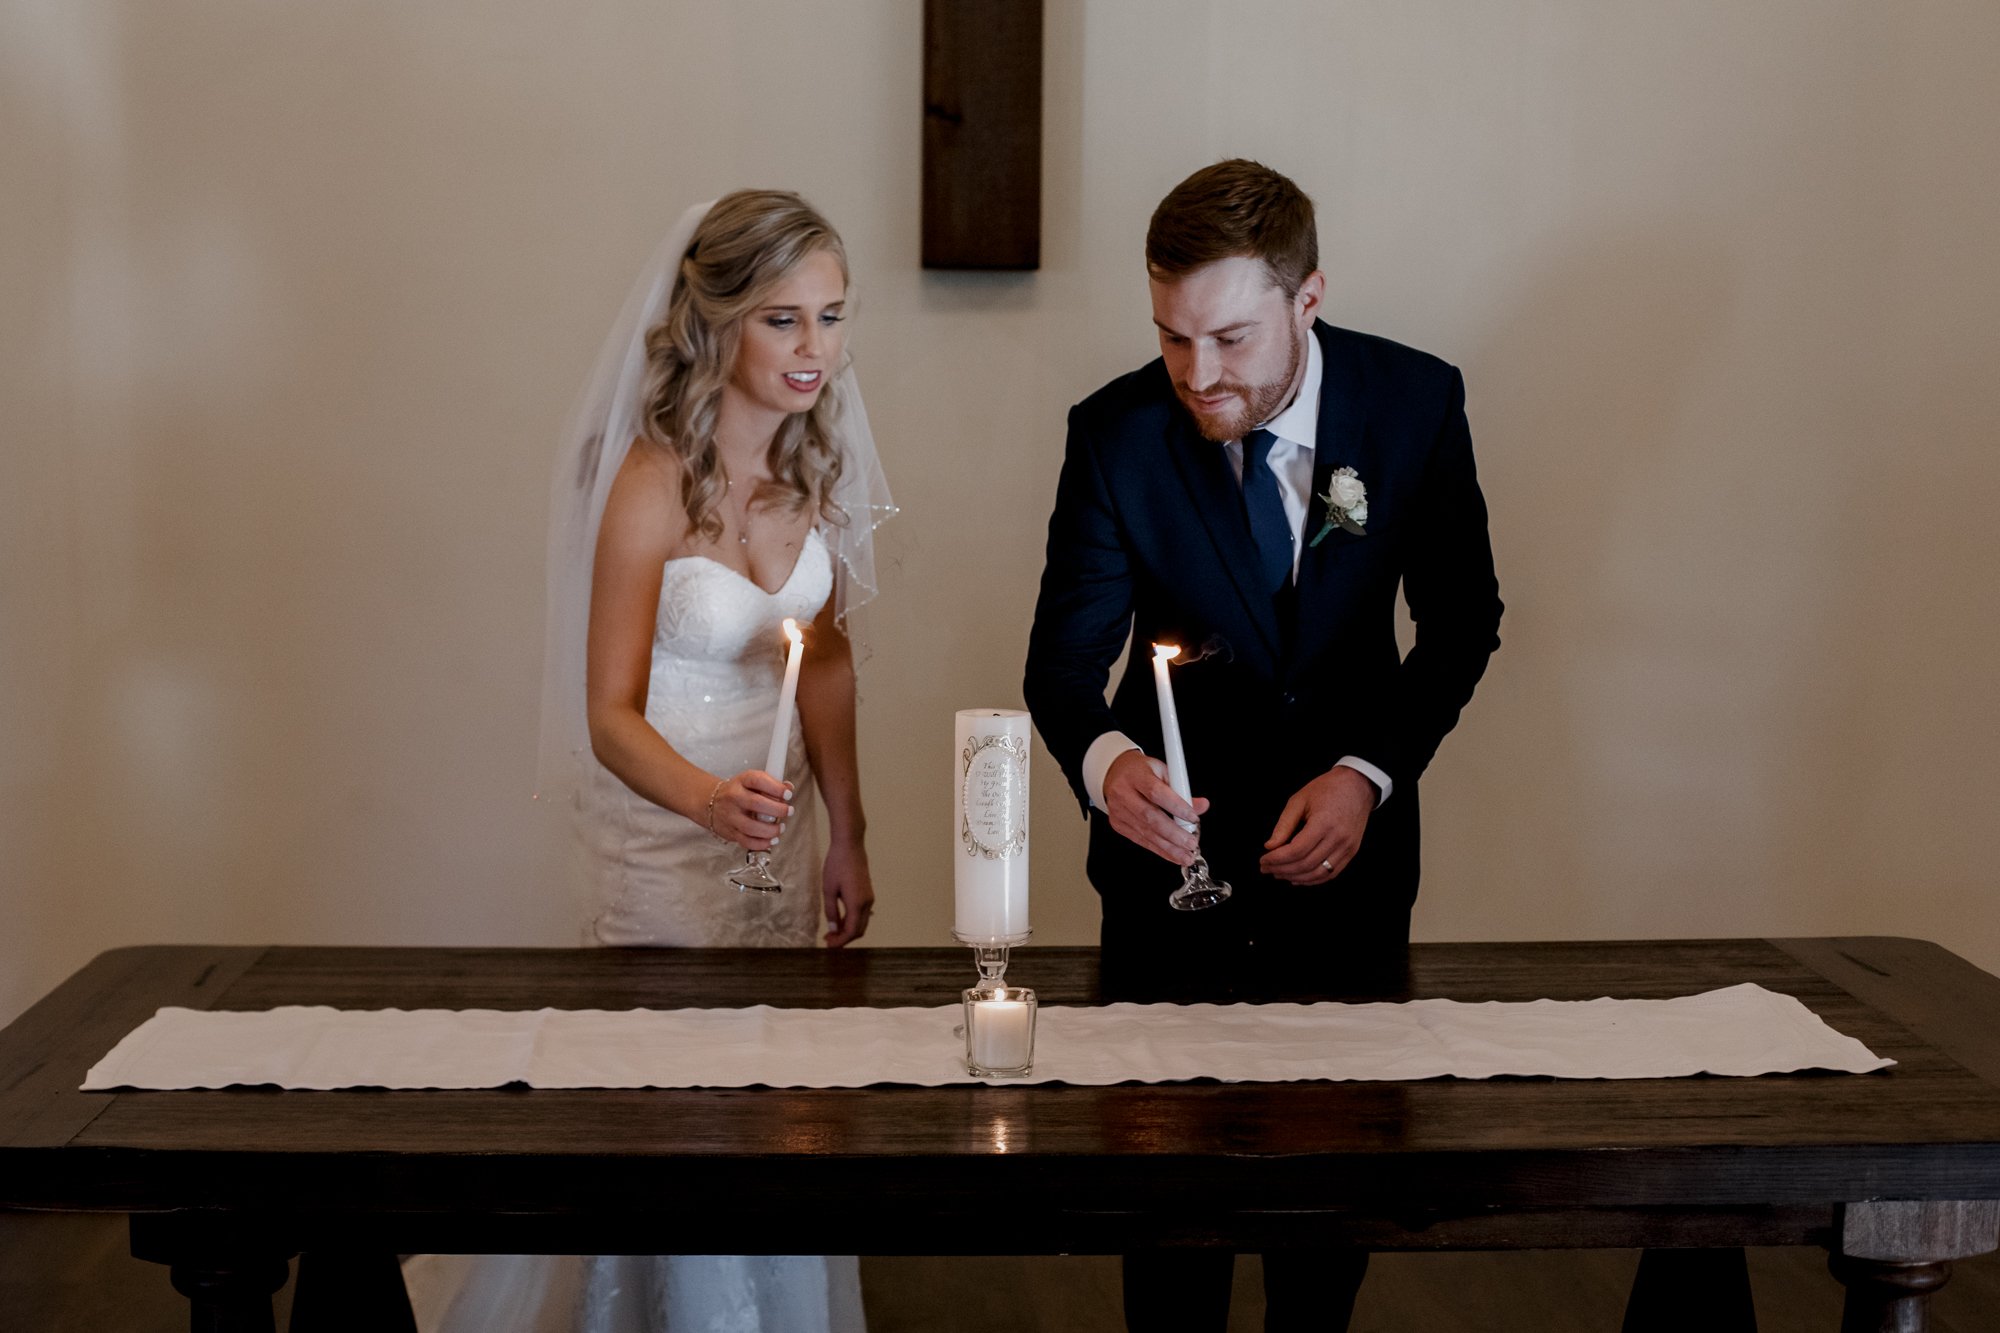 Candle light ceremony. Wedding at The Vine (New Ulm, TX)